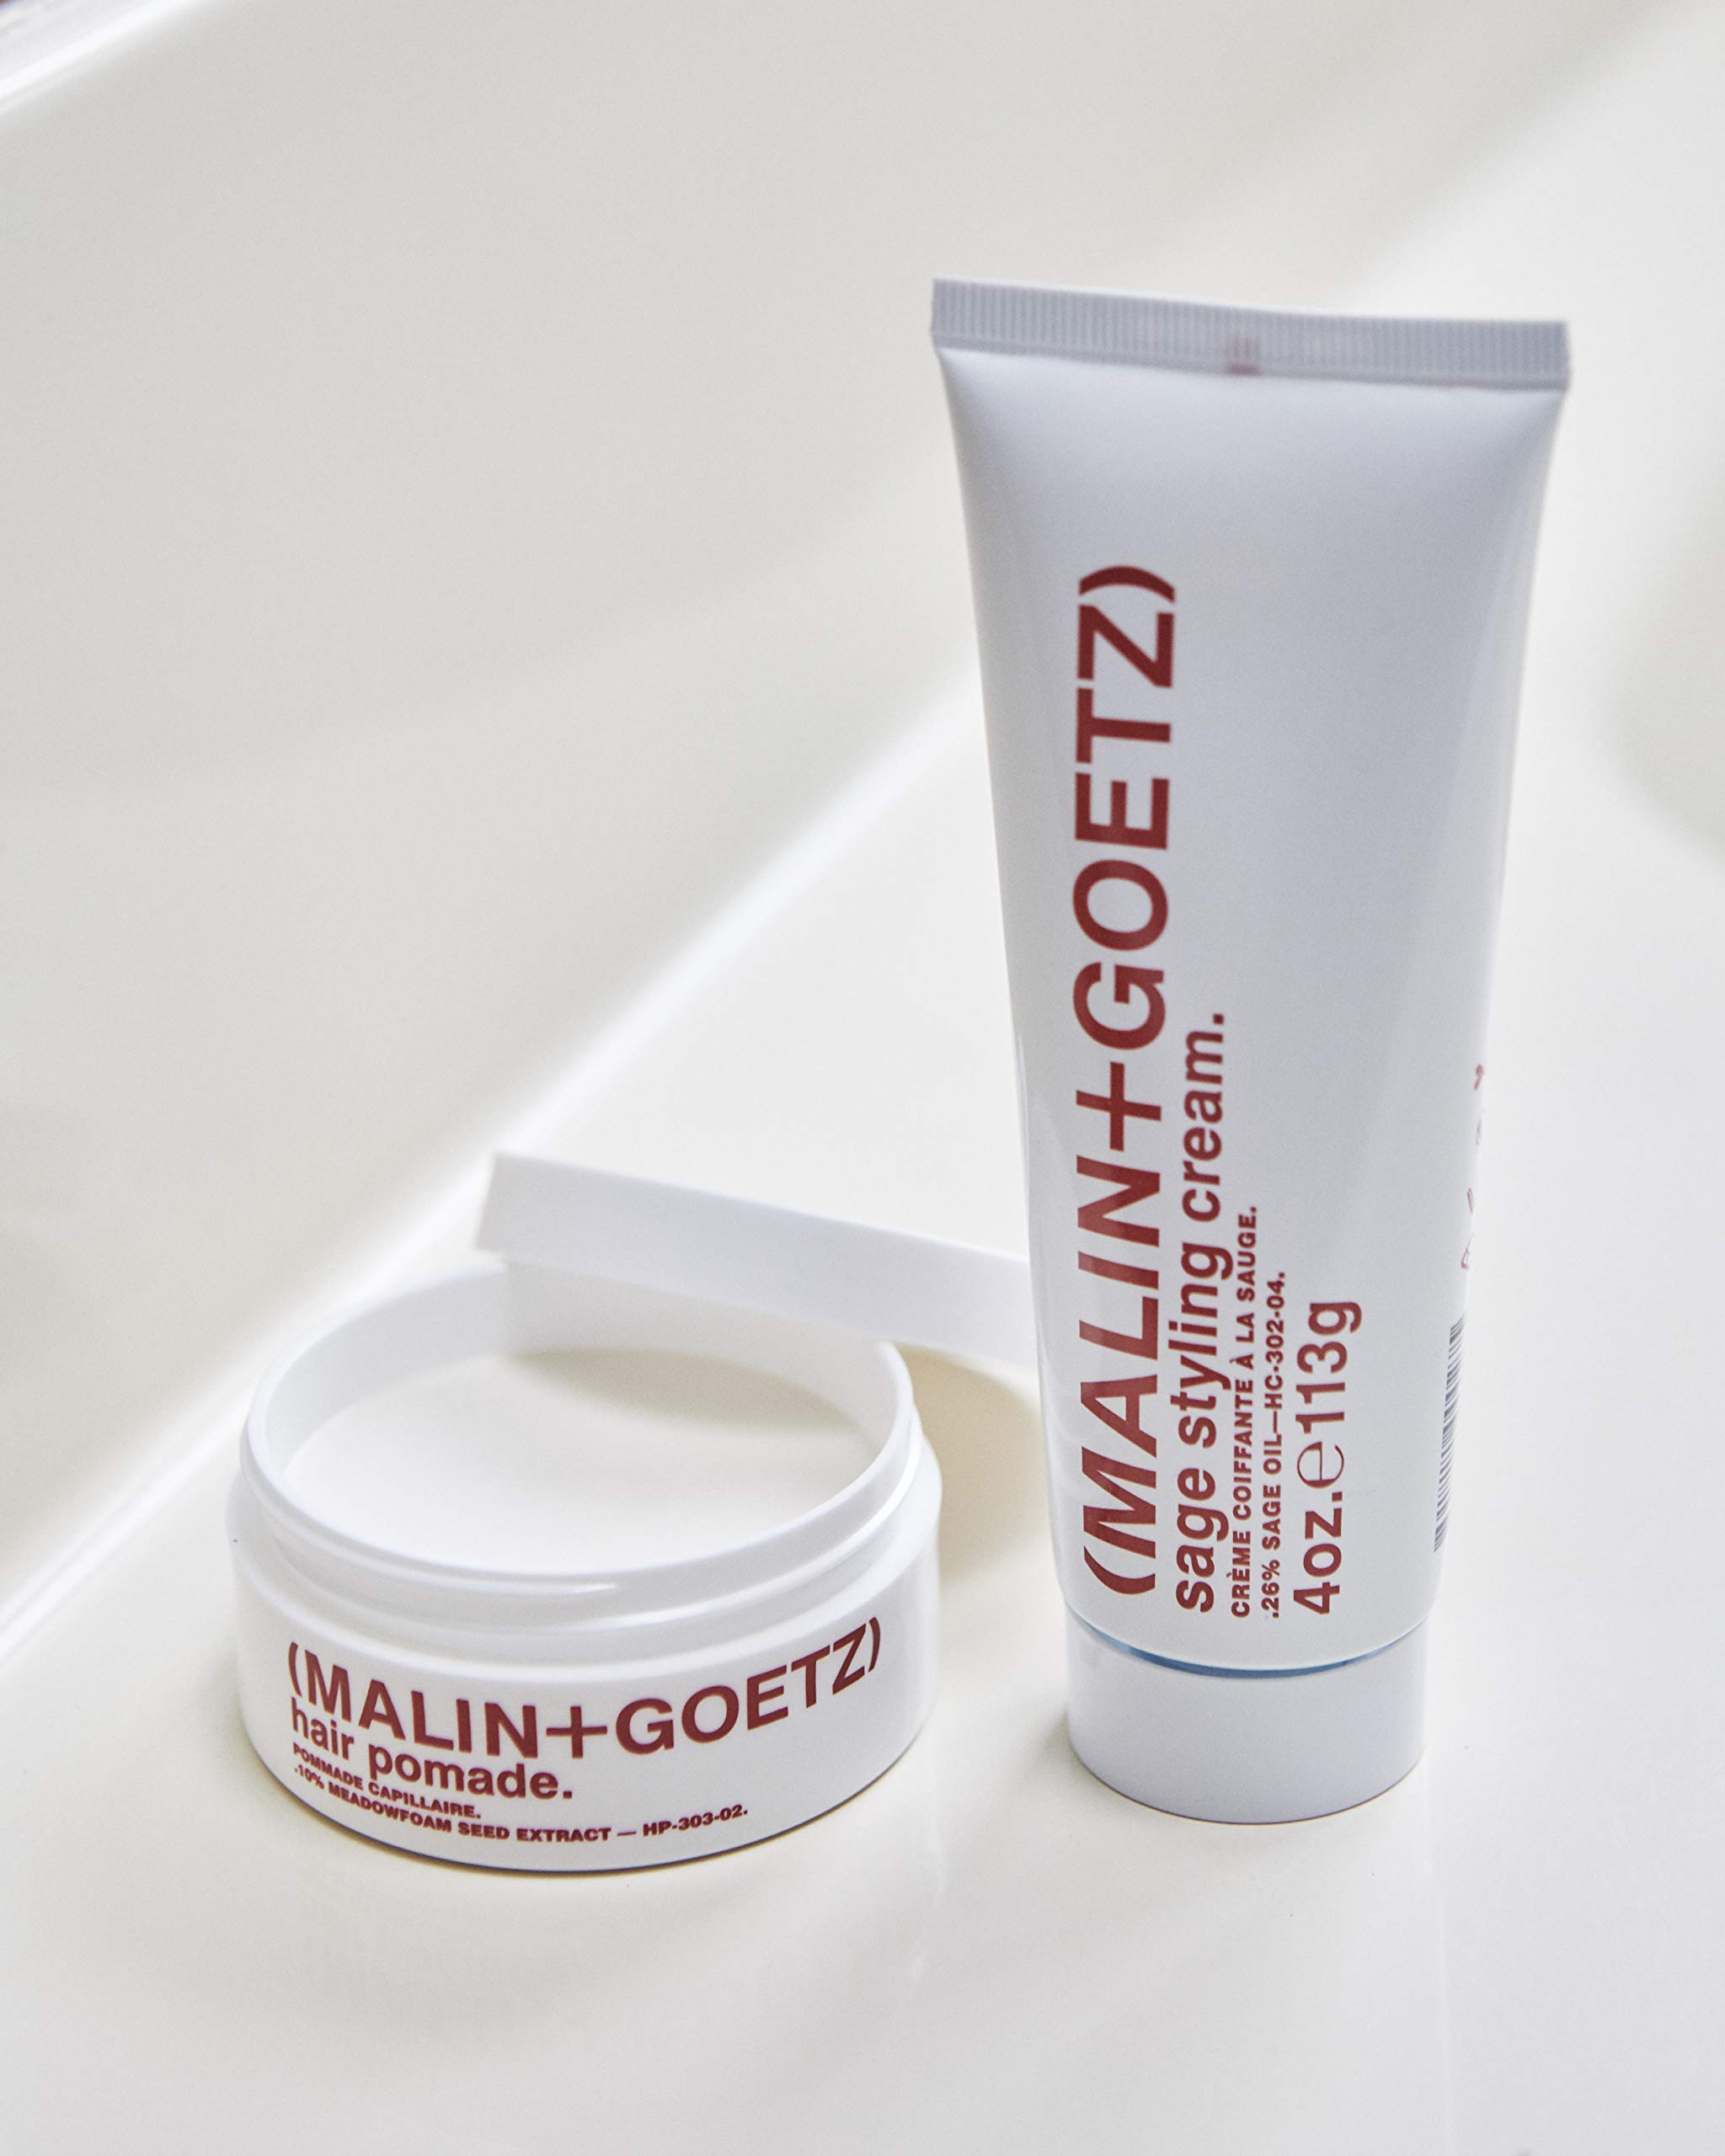 Malin + Goetz Hair Pomade â€” unisex firm lightweight flexible holds all day, for any hair type or texture. for natural shape, separation, wet or dry hair. cruelty-free vegan. 2 fl oz